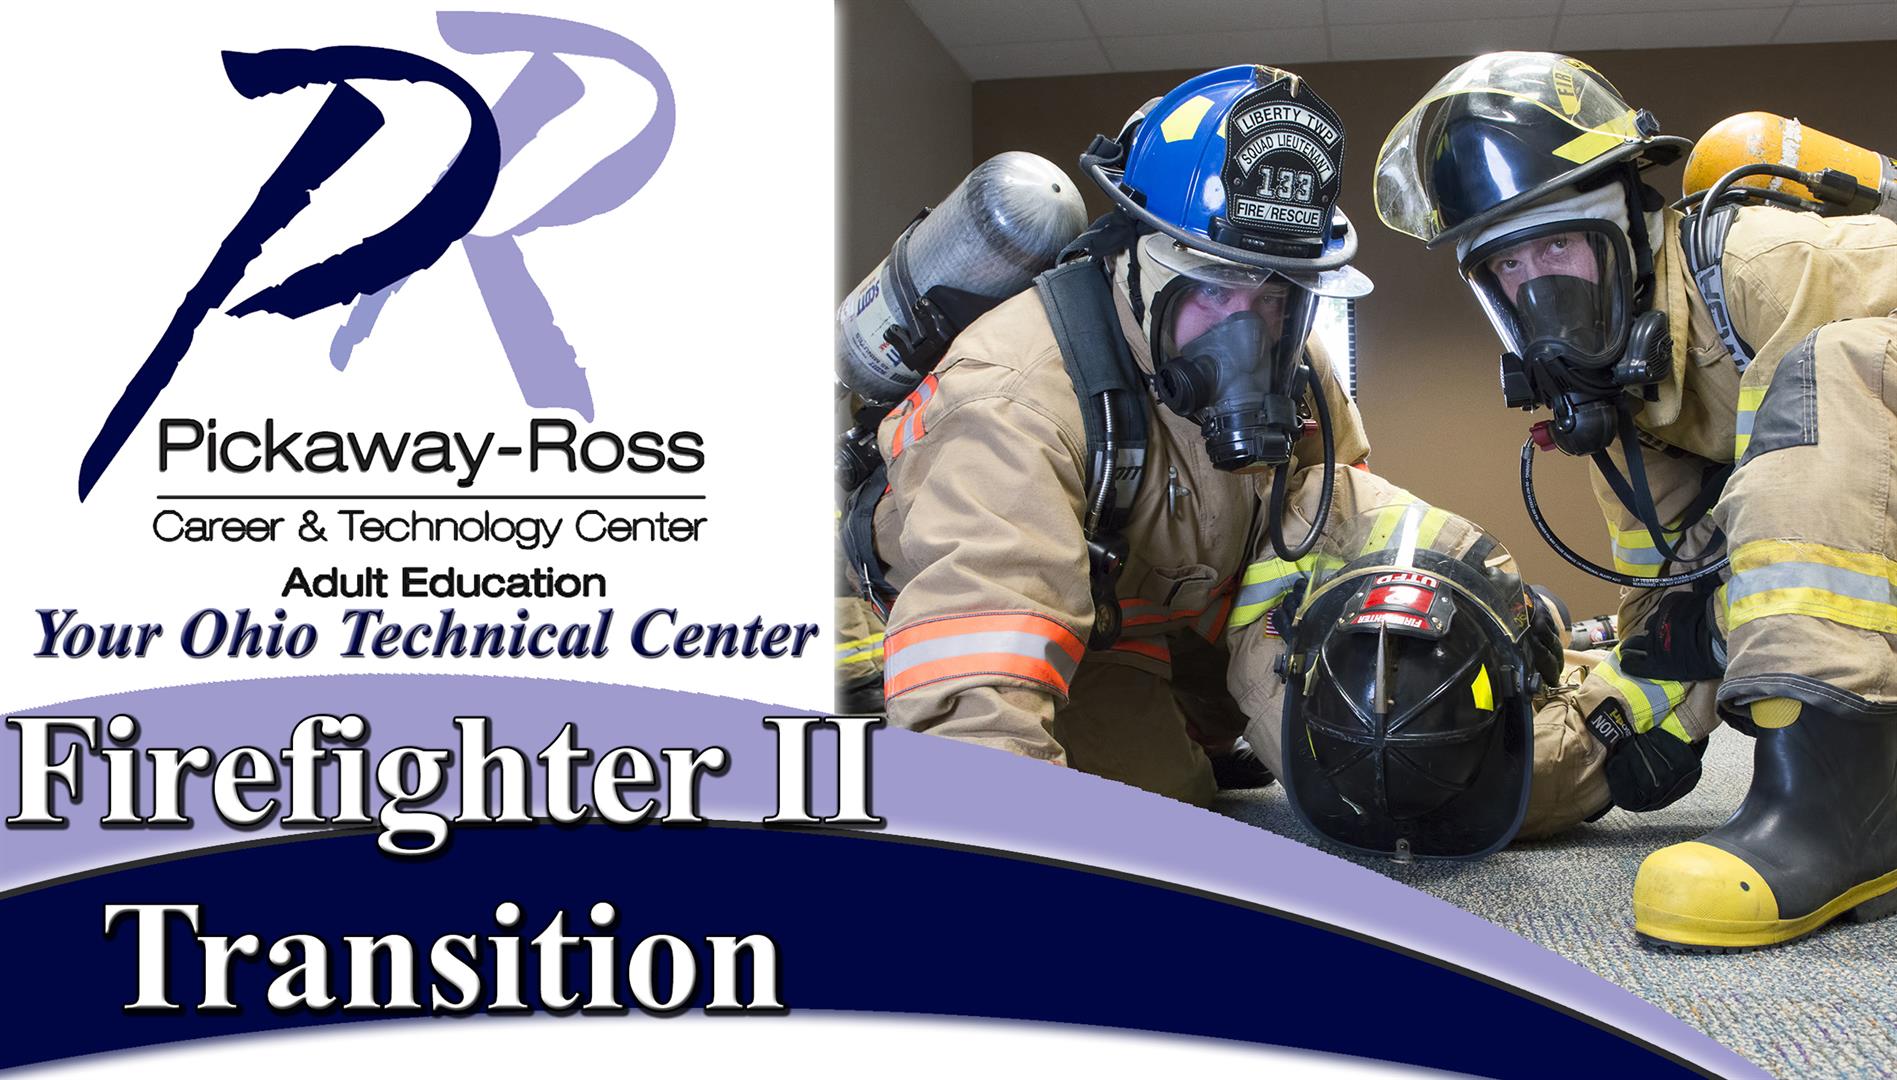 Firefighter II Transition Adult Education